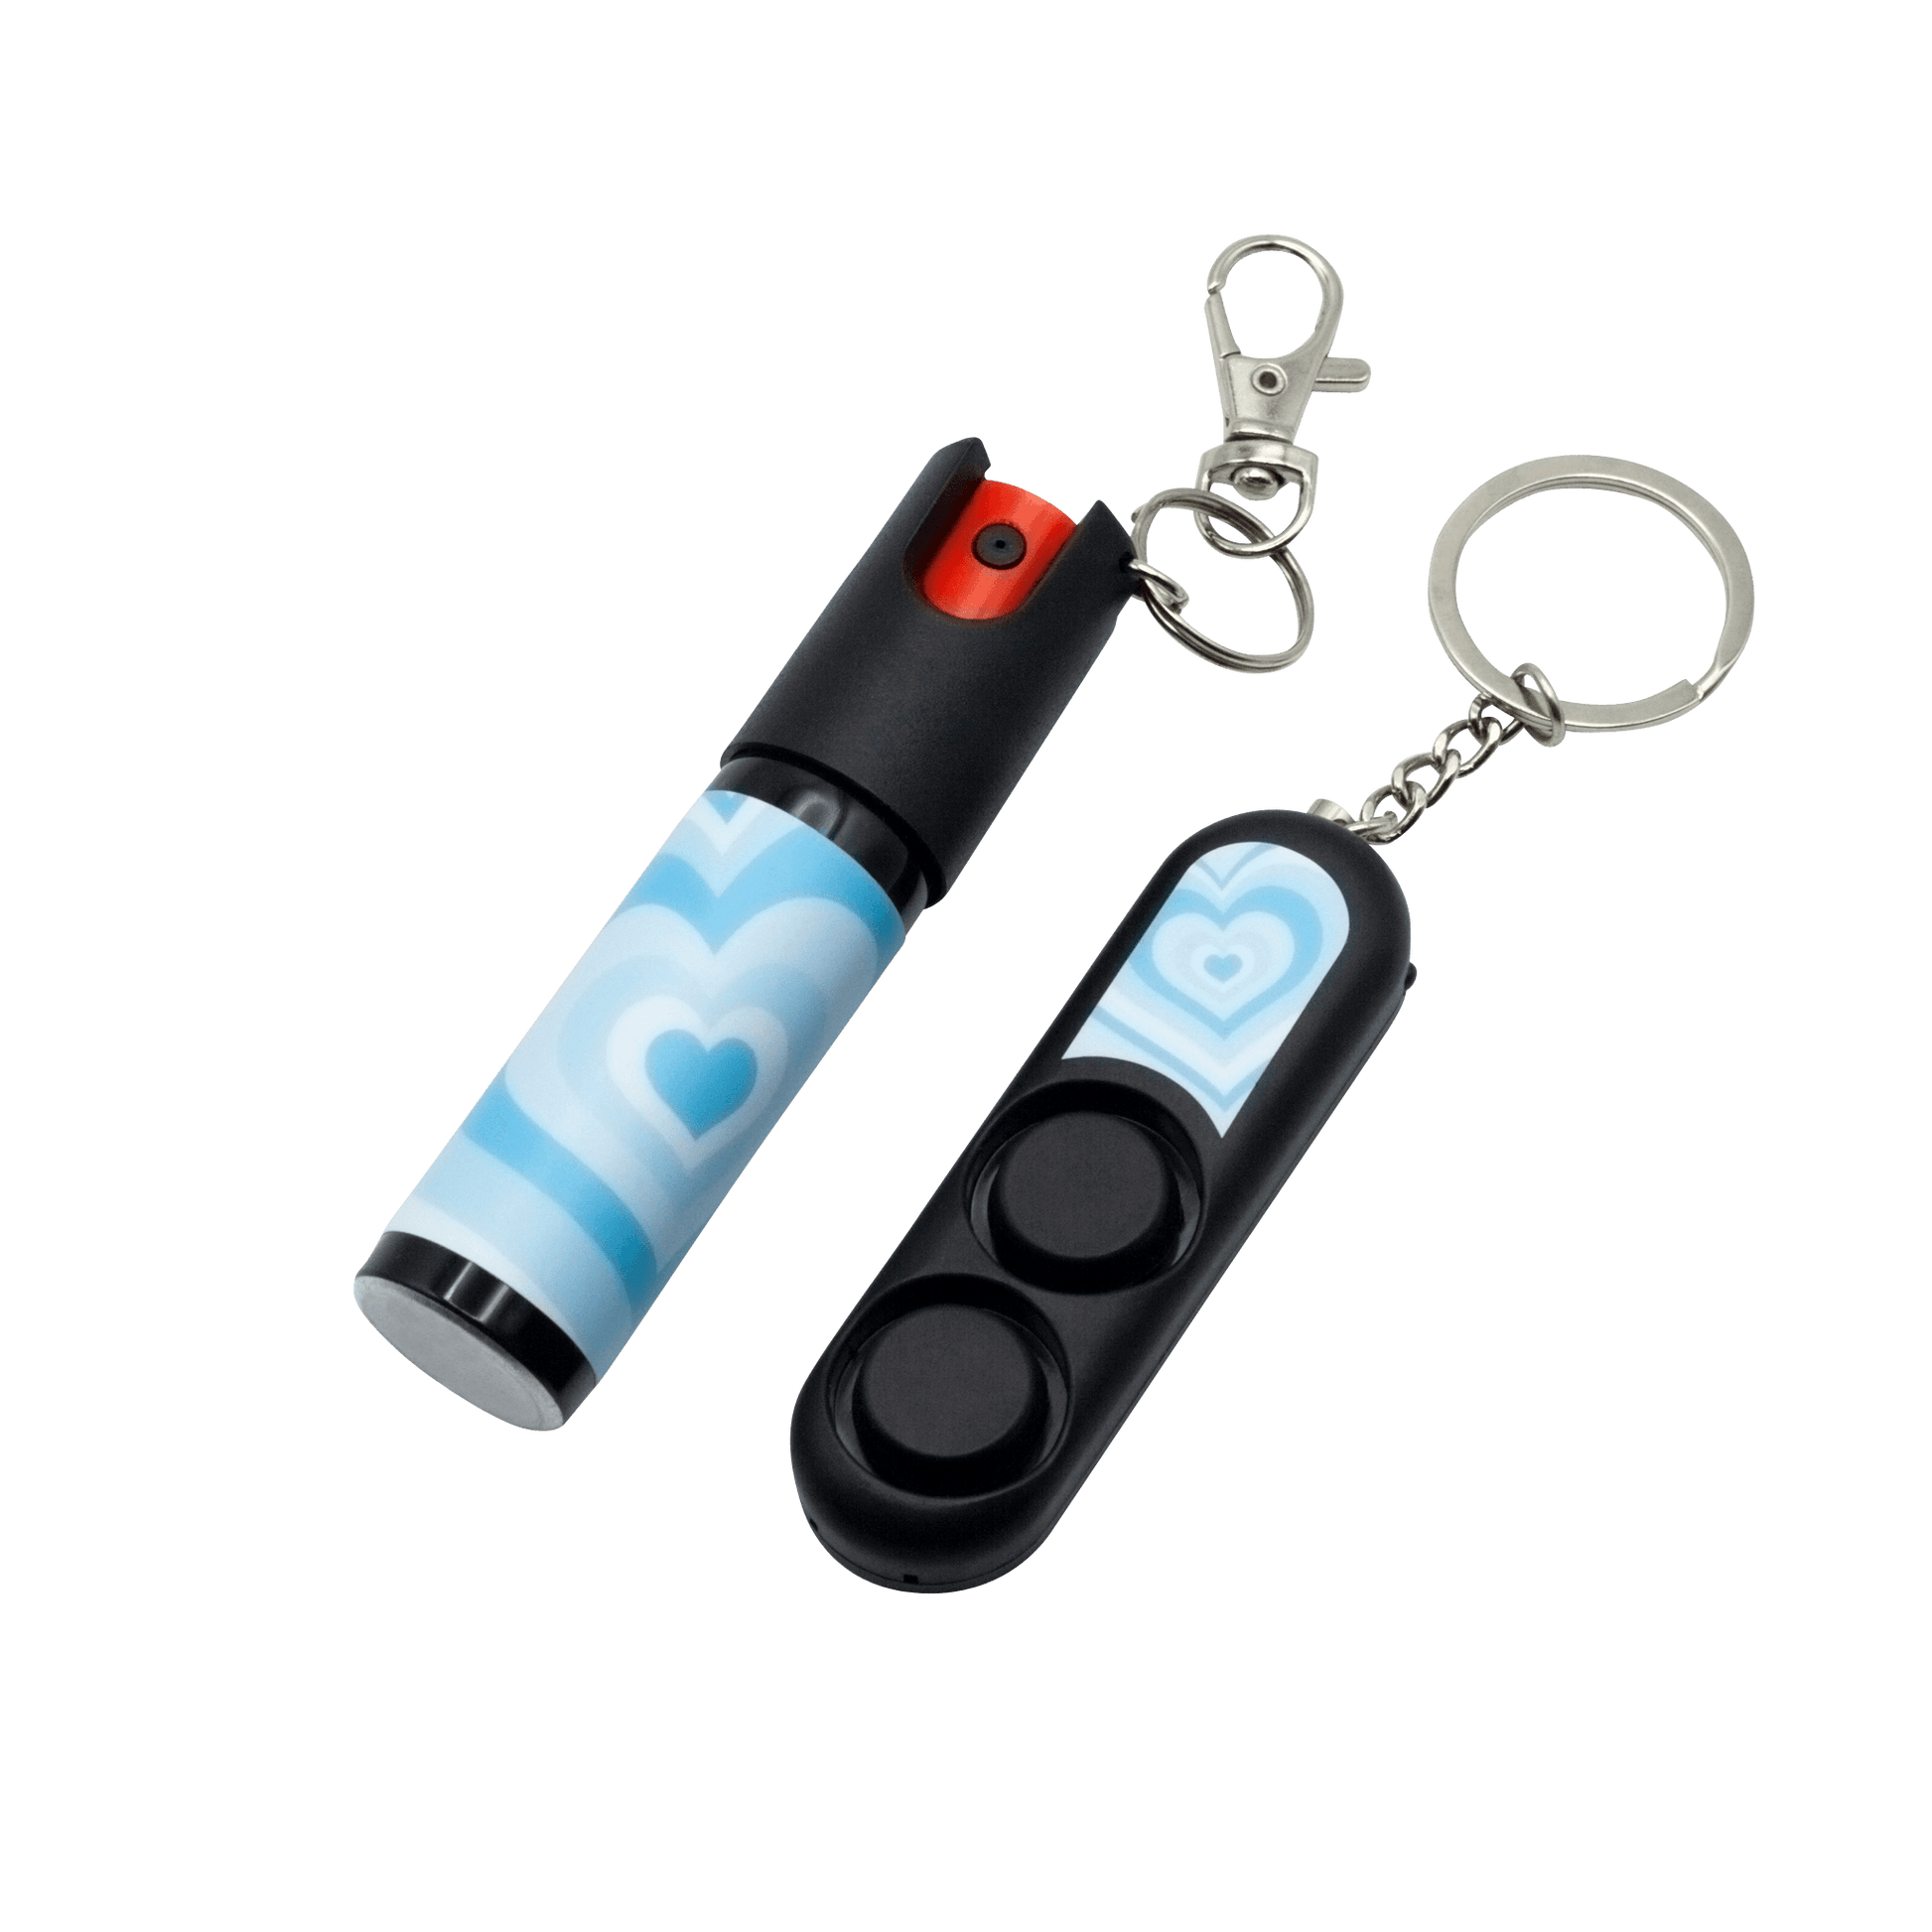 Blue Hearts SDK Pepper Spray (20ml compact Pepper Spray with keychain attachment) & SDK Personal Safety Alarm (120db loud sound personal alarm which activates with pin removal)